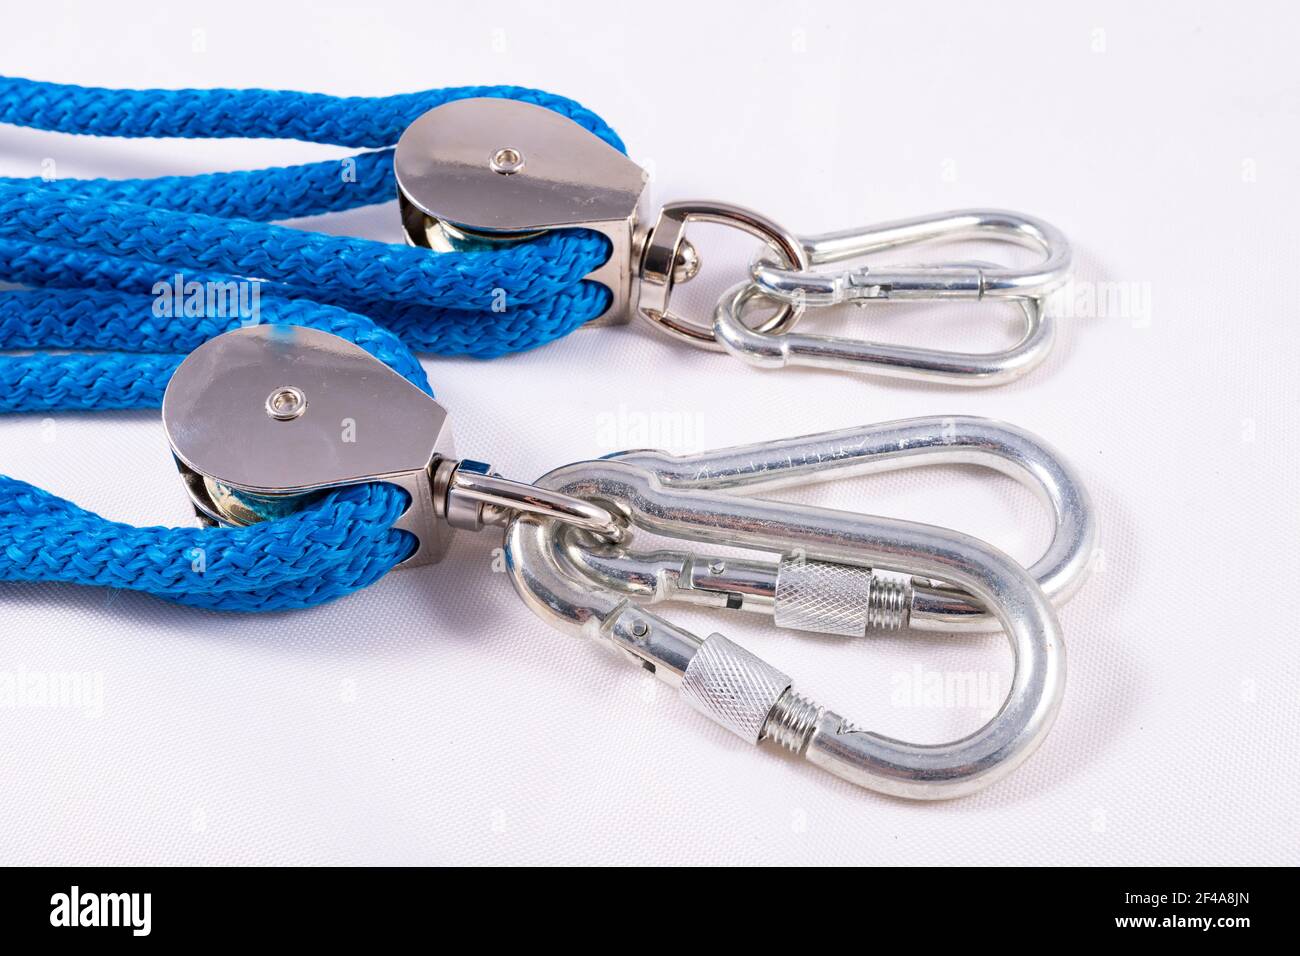 Rope, carabiner and sailing pulley. Accessories used on a deep sea yacht. Light background. Stock Photo